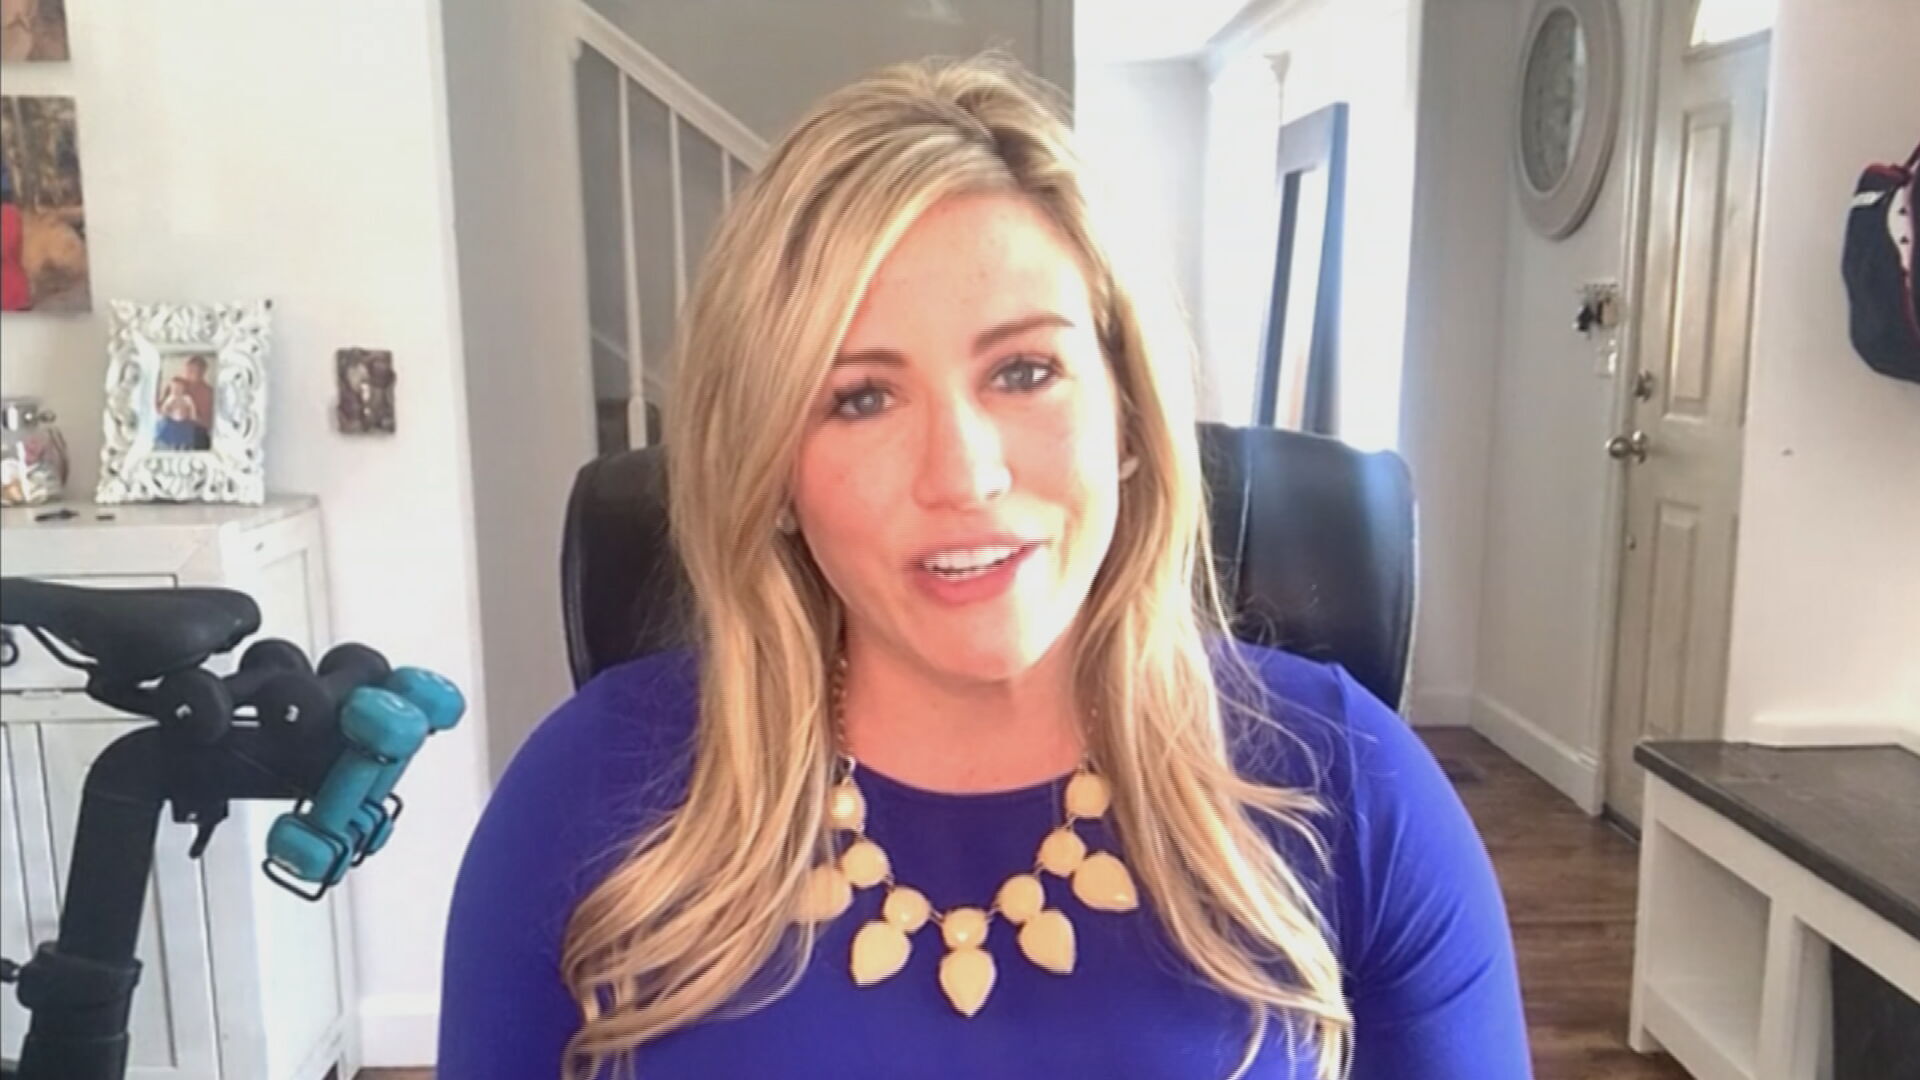 Watch: Local Mompreneur Shares How To Turn Side Hustle Into Business 